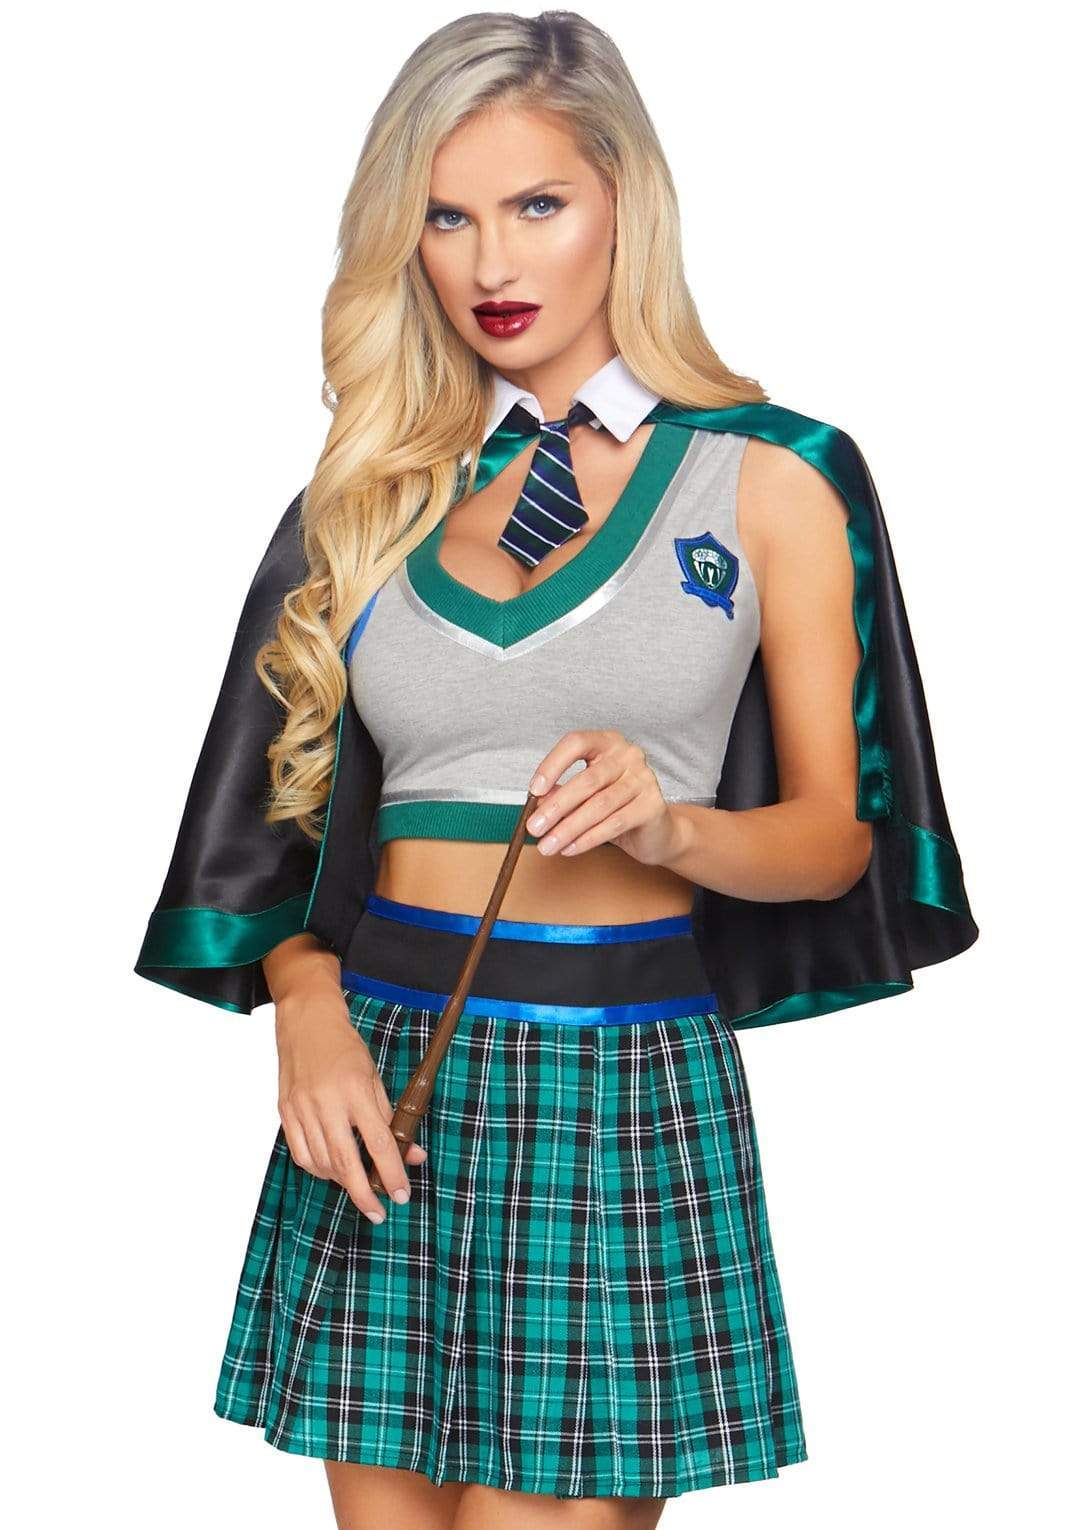 Spellcaster School Girl Plunging Vest and Plaid Skirt and Cape with Attached Tie